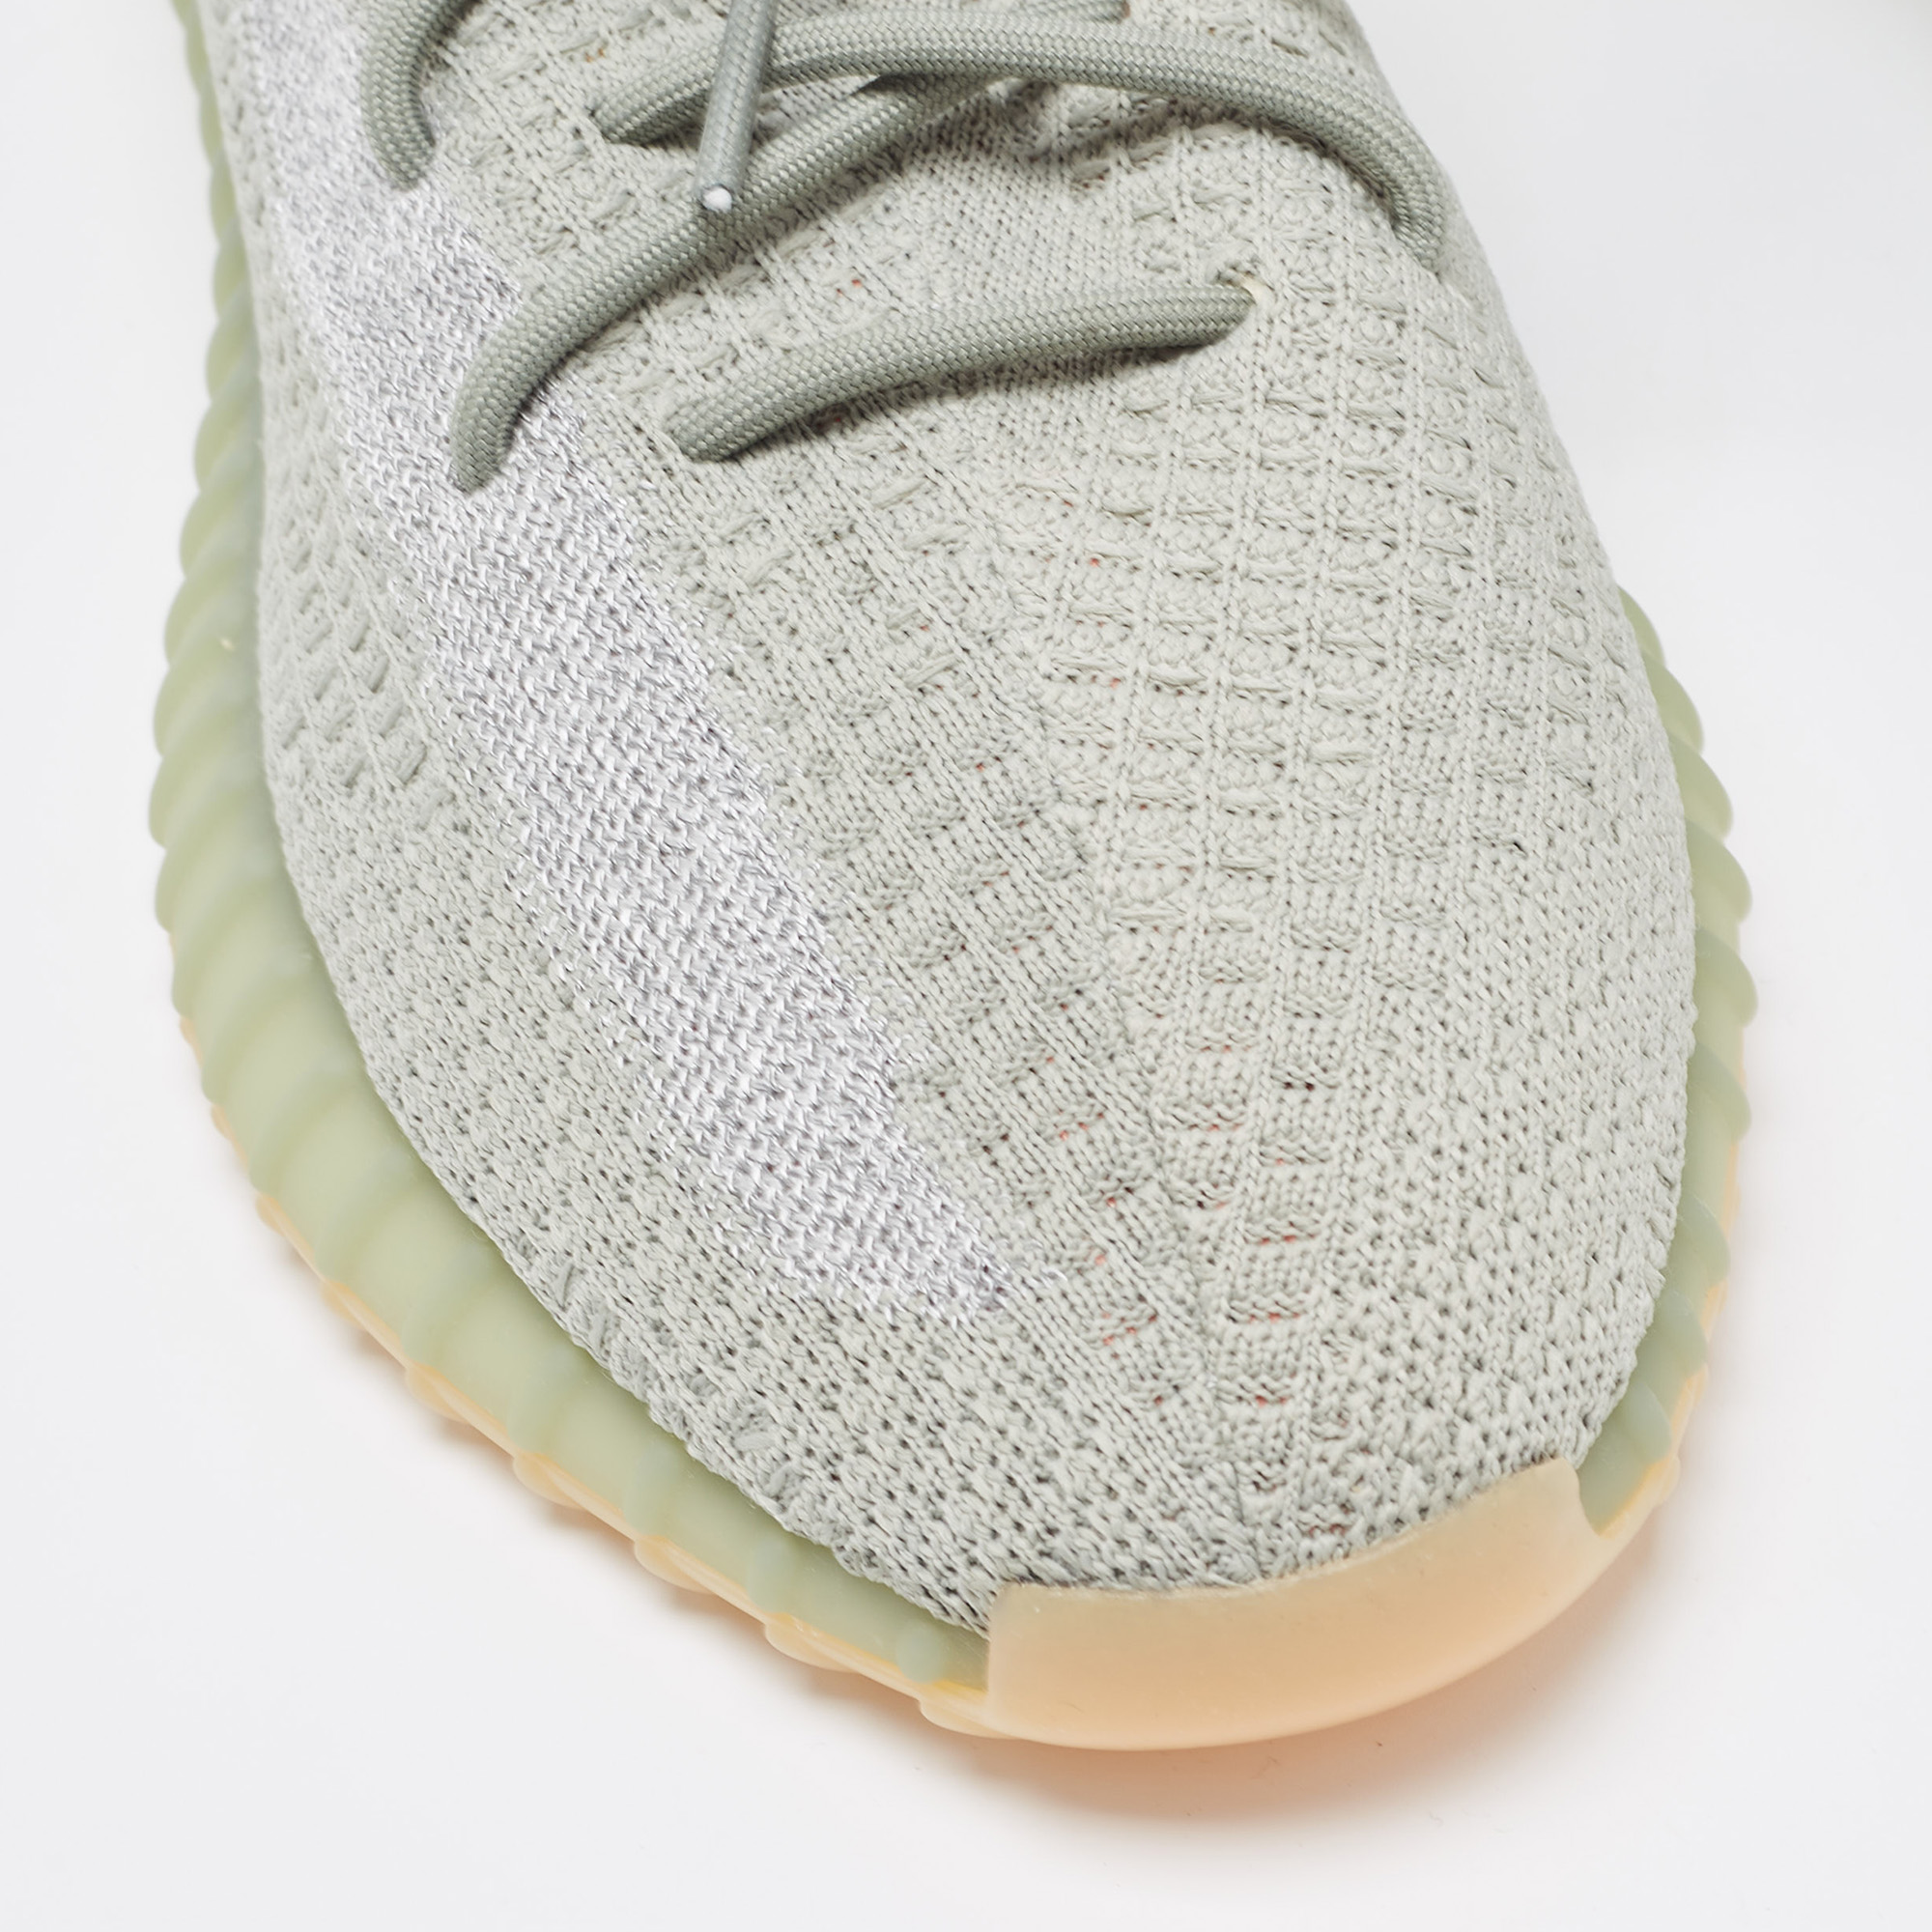 Yeezy X Adidas Green Knit Fabric Boost 350 V2 Desert Sage Sneakers Size 47 1/3